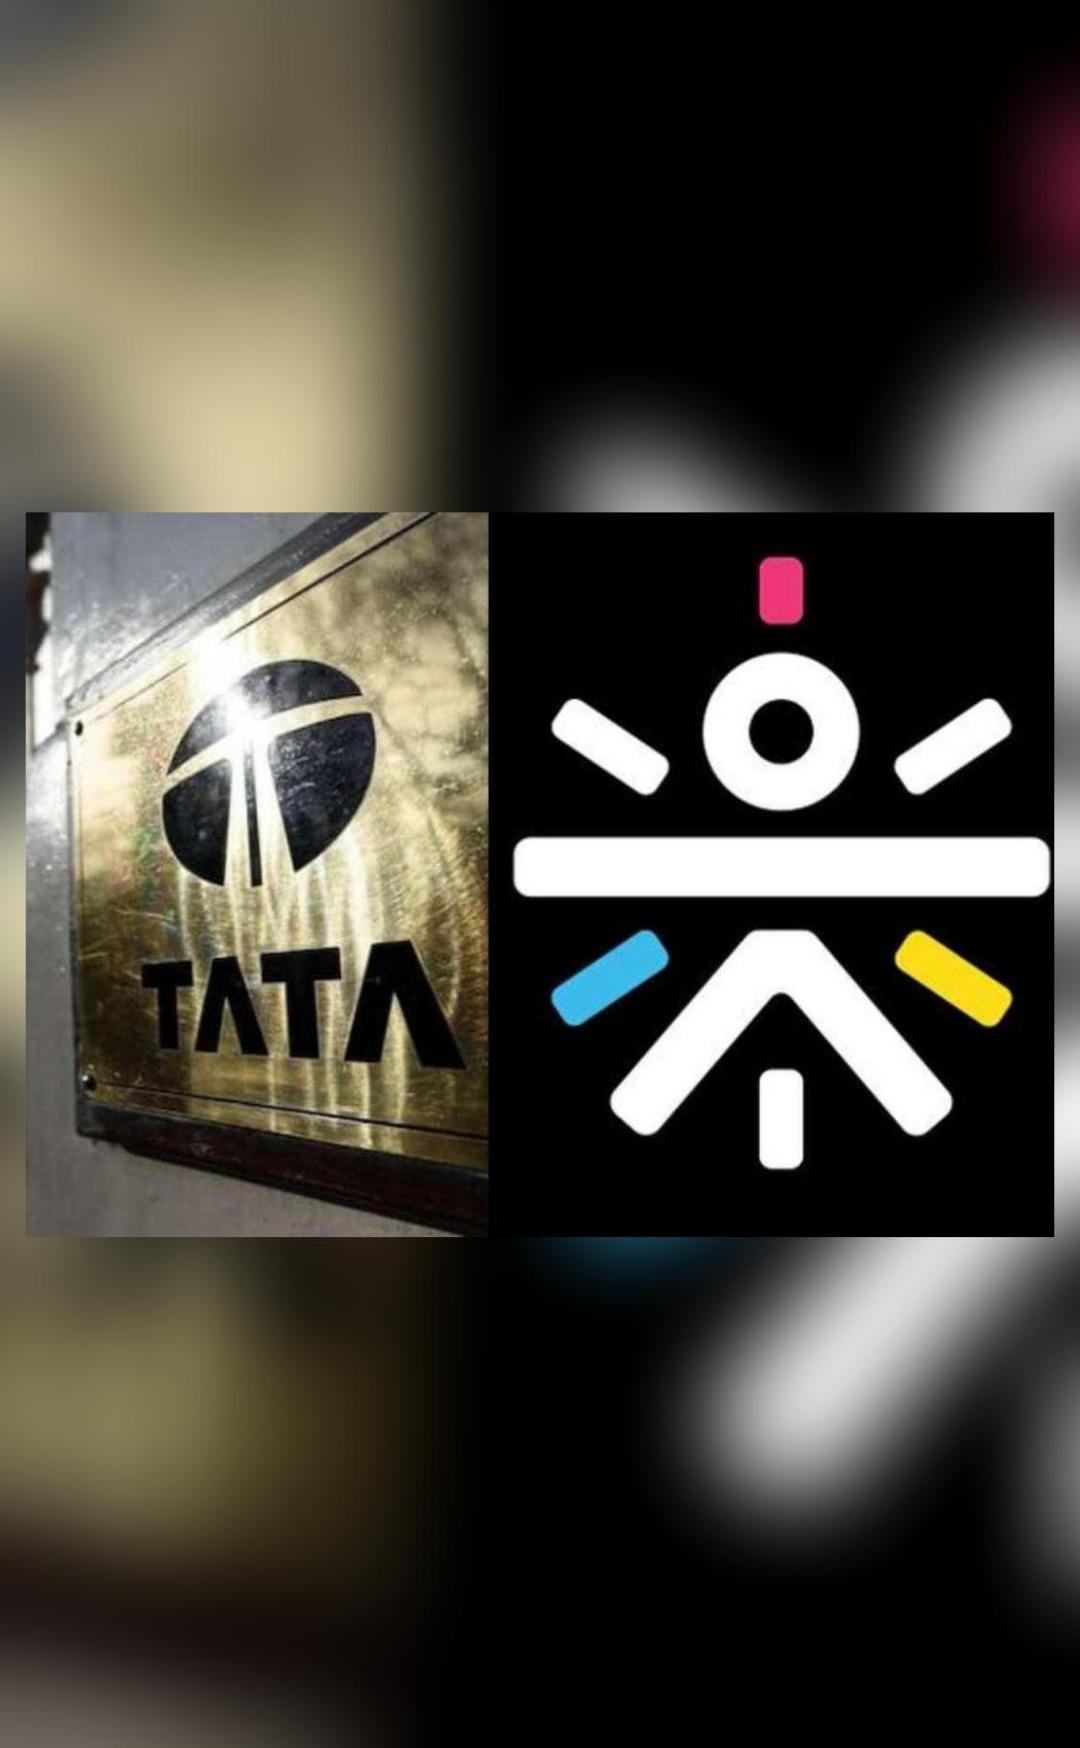 Tata-backed fitness chain Cult.fit gears up to float IPO in 12-18 months